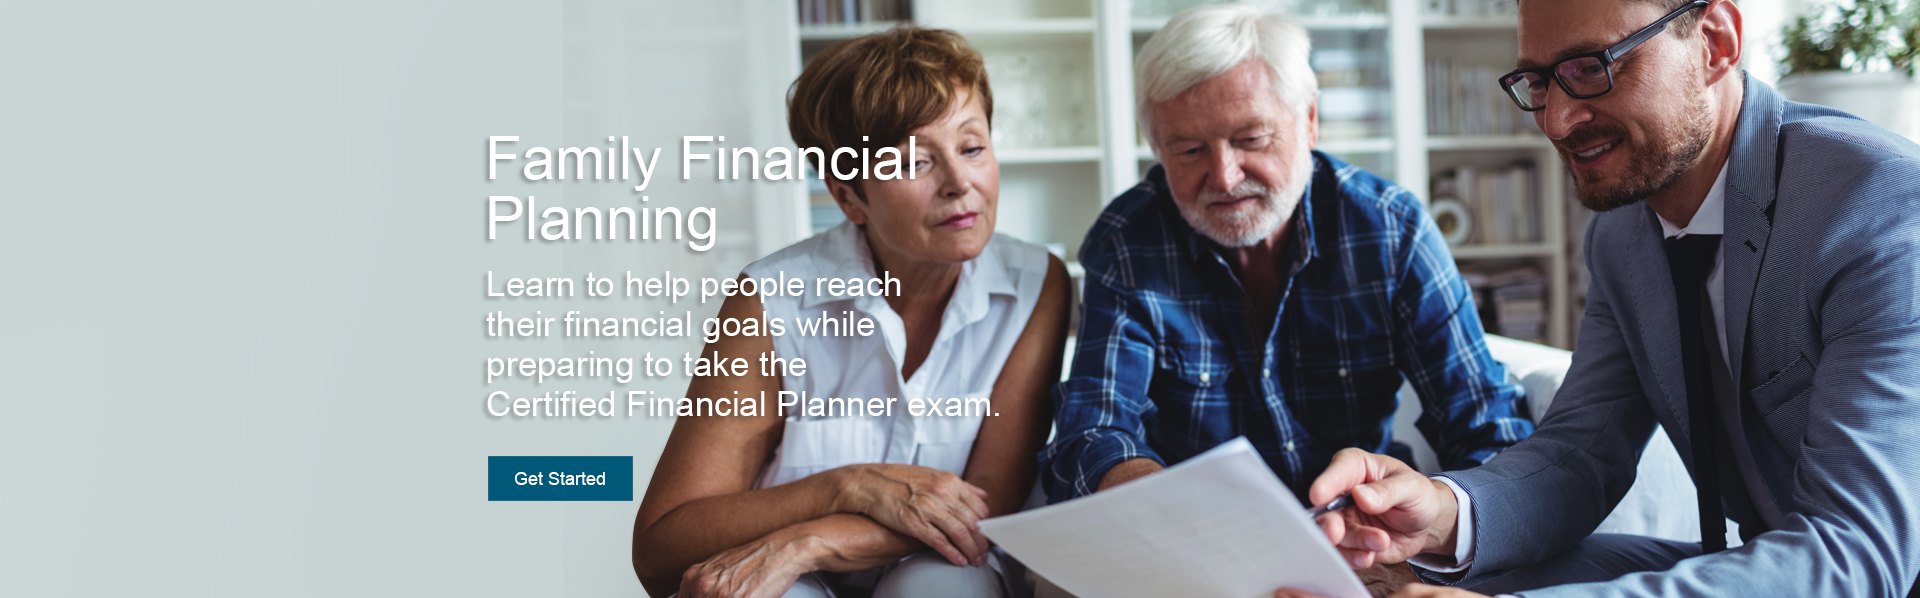 The online master’s degree and graduate certificate in family financial planning will teach you to help people reach their financial goals while preparing you for the Certified Financial Planner (CFP) exam.